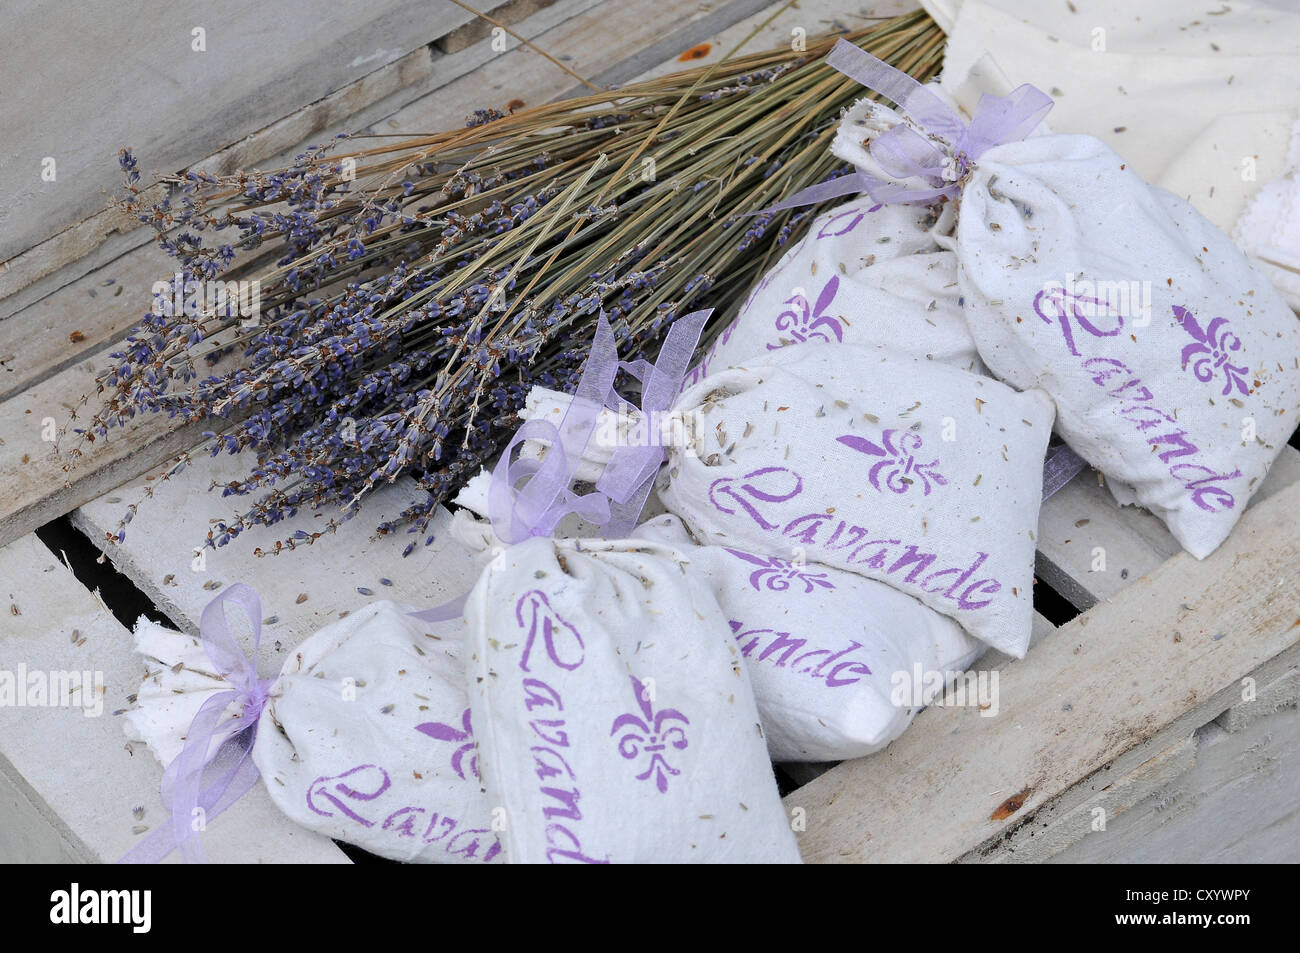 Dried lavender, sachets with lavender flowerheads Stock Photo